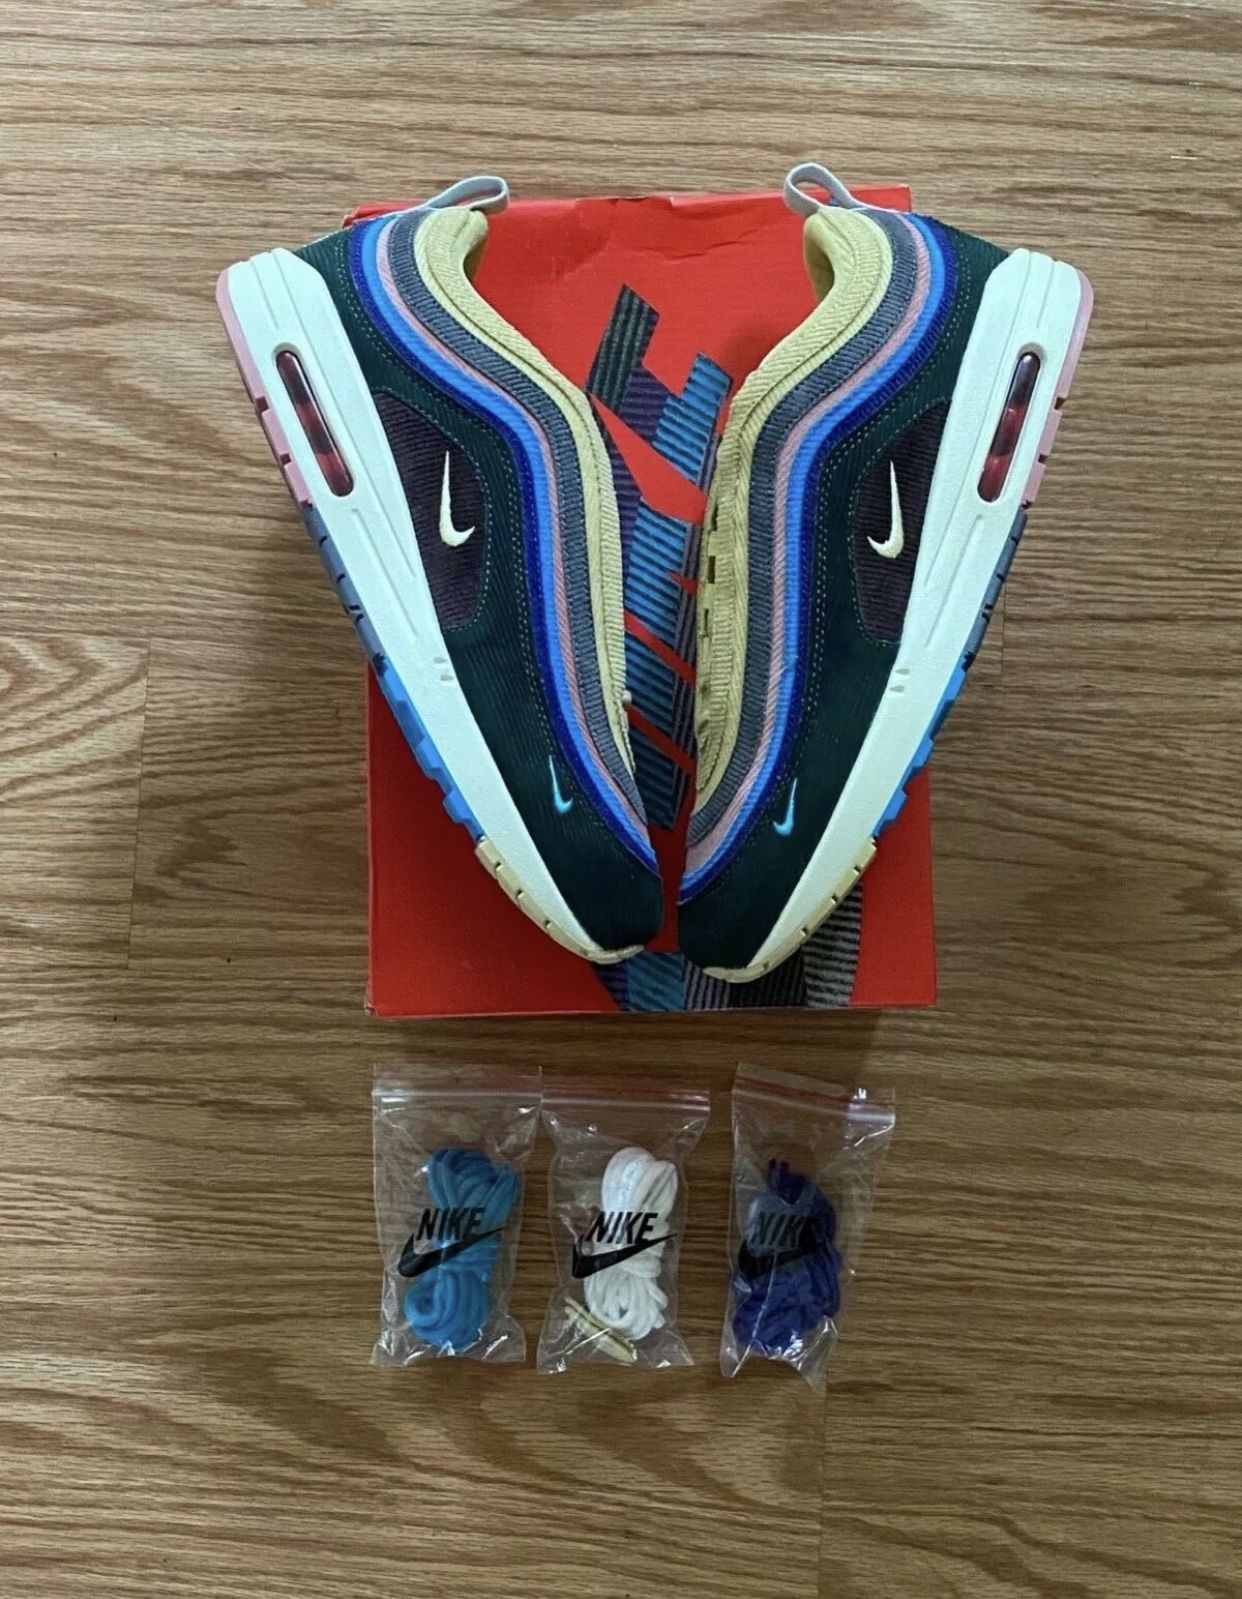 Nike airmax 97 Sean Wotherspoon 1:1 reps